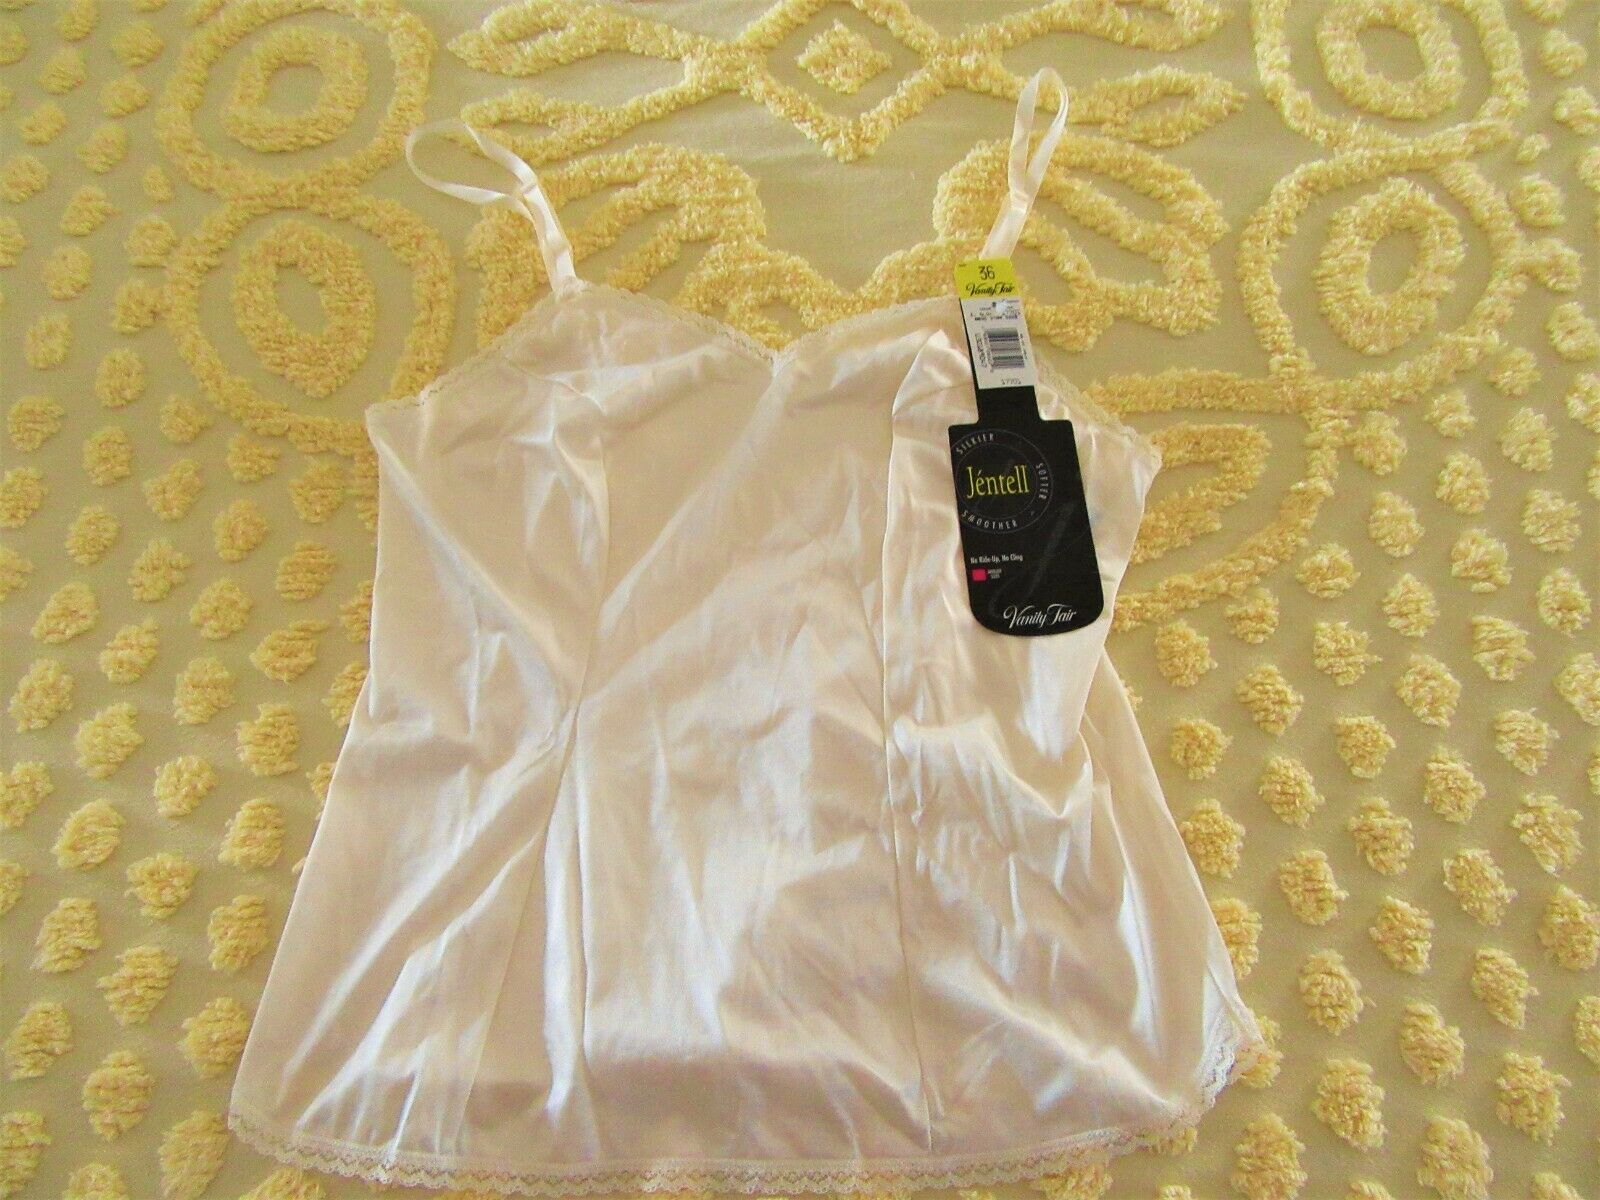 Vintage Vanitity Fair Camisole Jentell - Size 36 - New With Tags